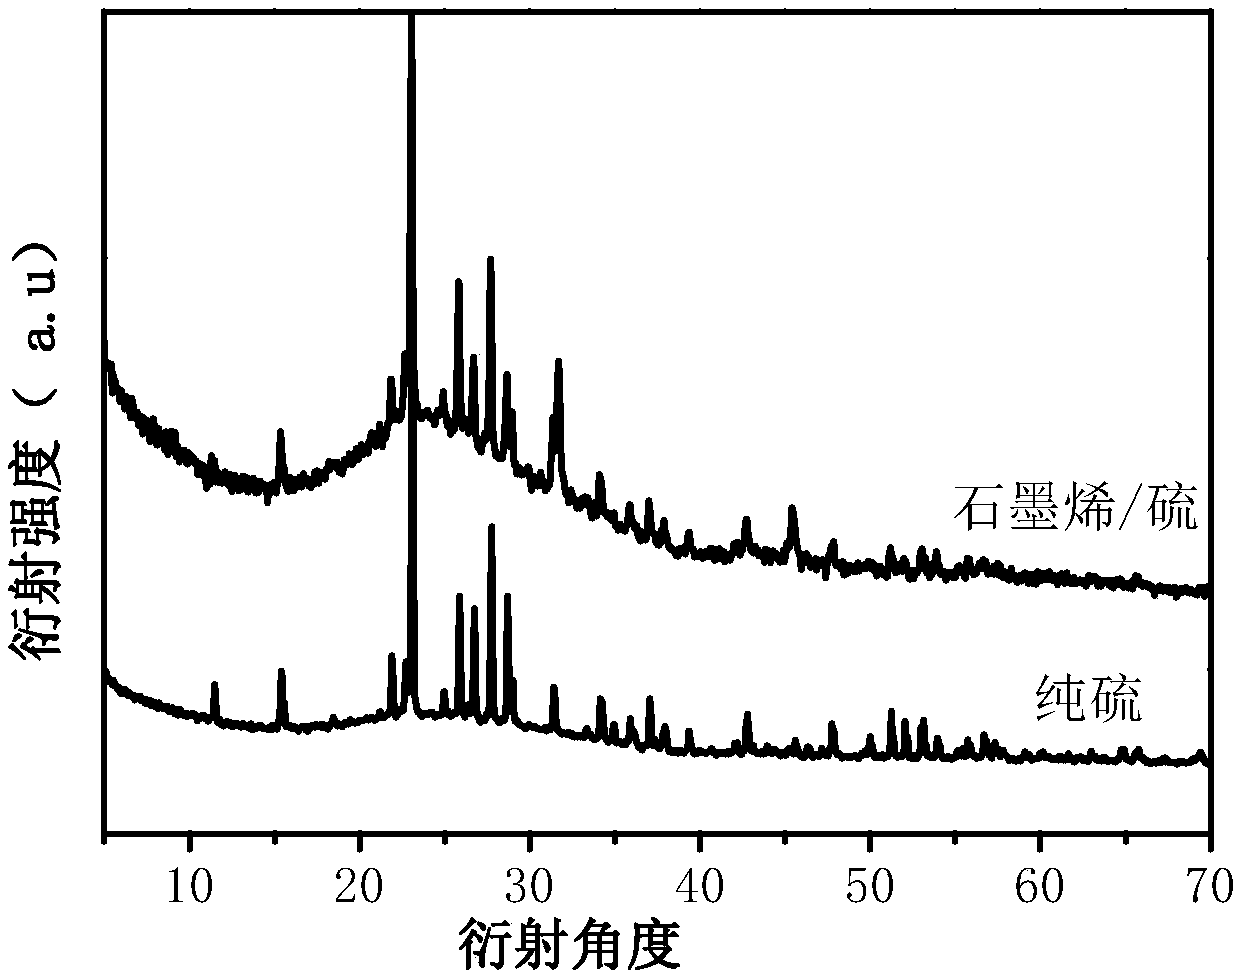 Self-supporting lithium-sulfur battery cathode material, preparation method and application thereof